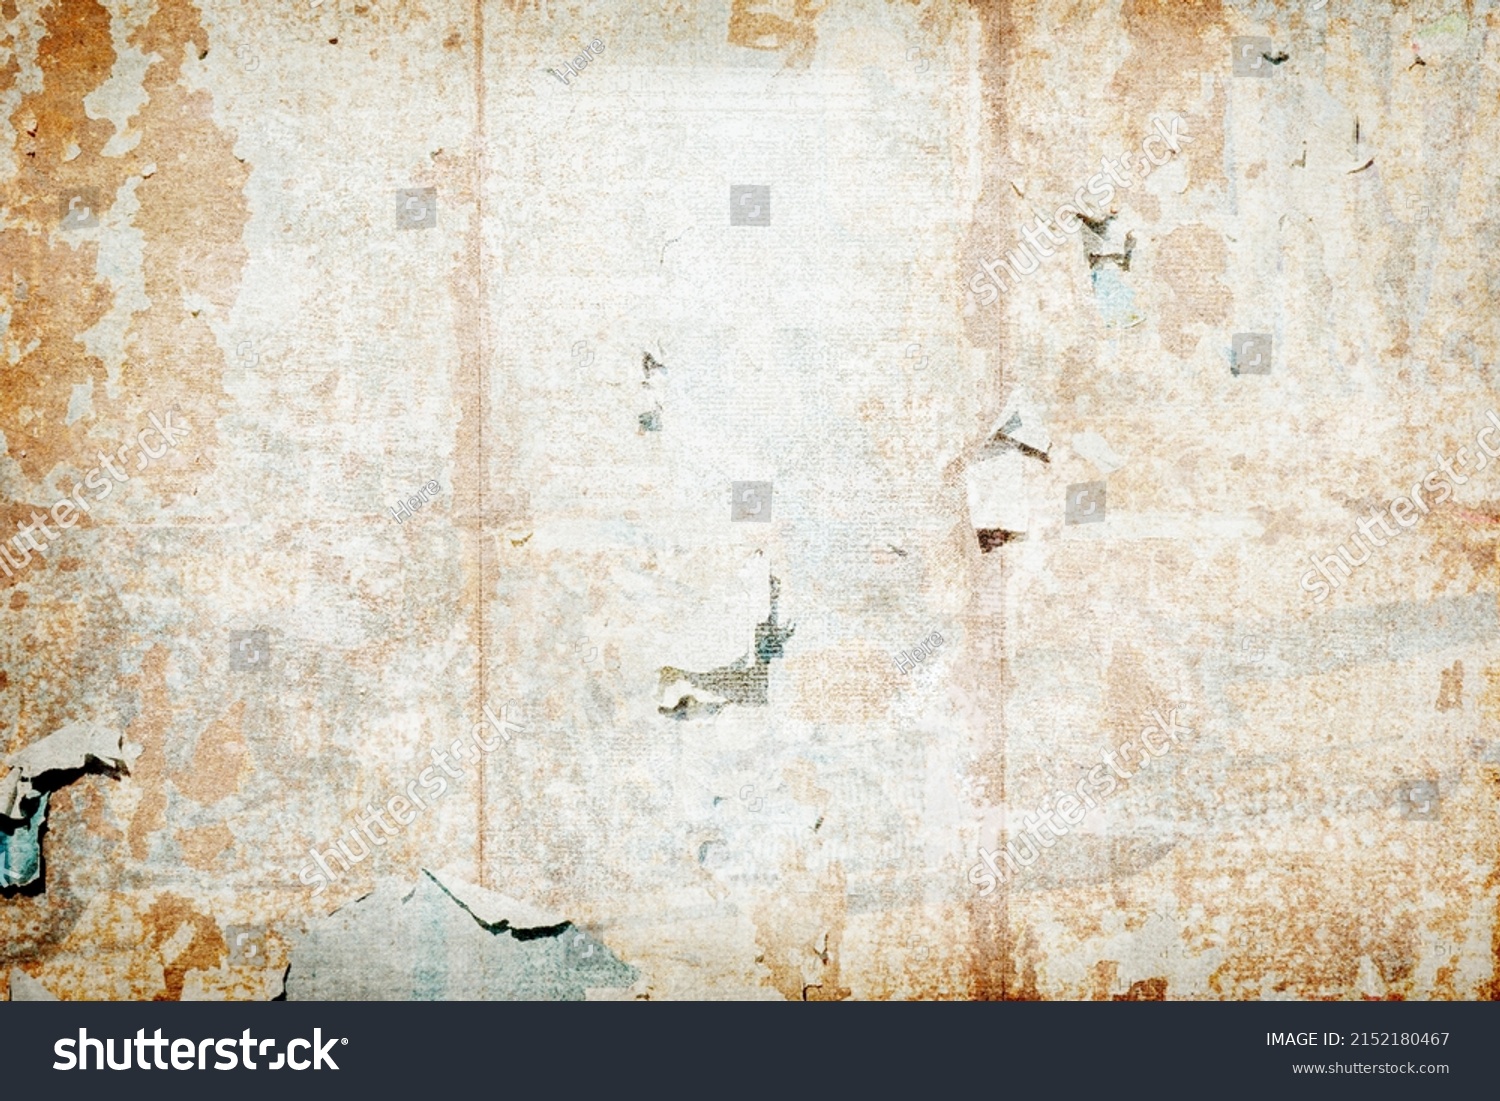 OLD PAPER TEXTURE, TORN WALLPAPER PATTERN, VINTAGE POSTER WALL DESIGN, DRTY SCRATCHED TEXTURED WALLPAPER TEMPLATE WITH FADED WHITE SPACE FOR TEXT, RETRO DESIGN #2152180467